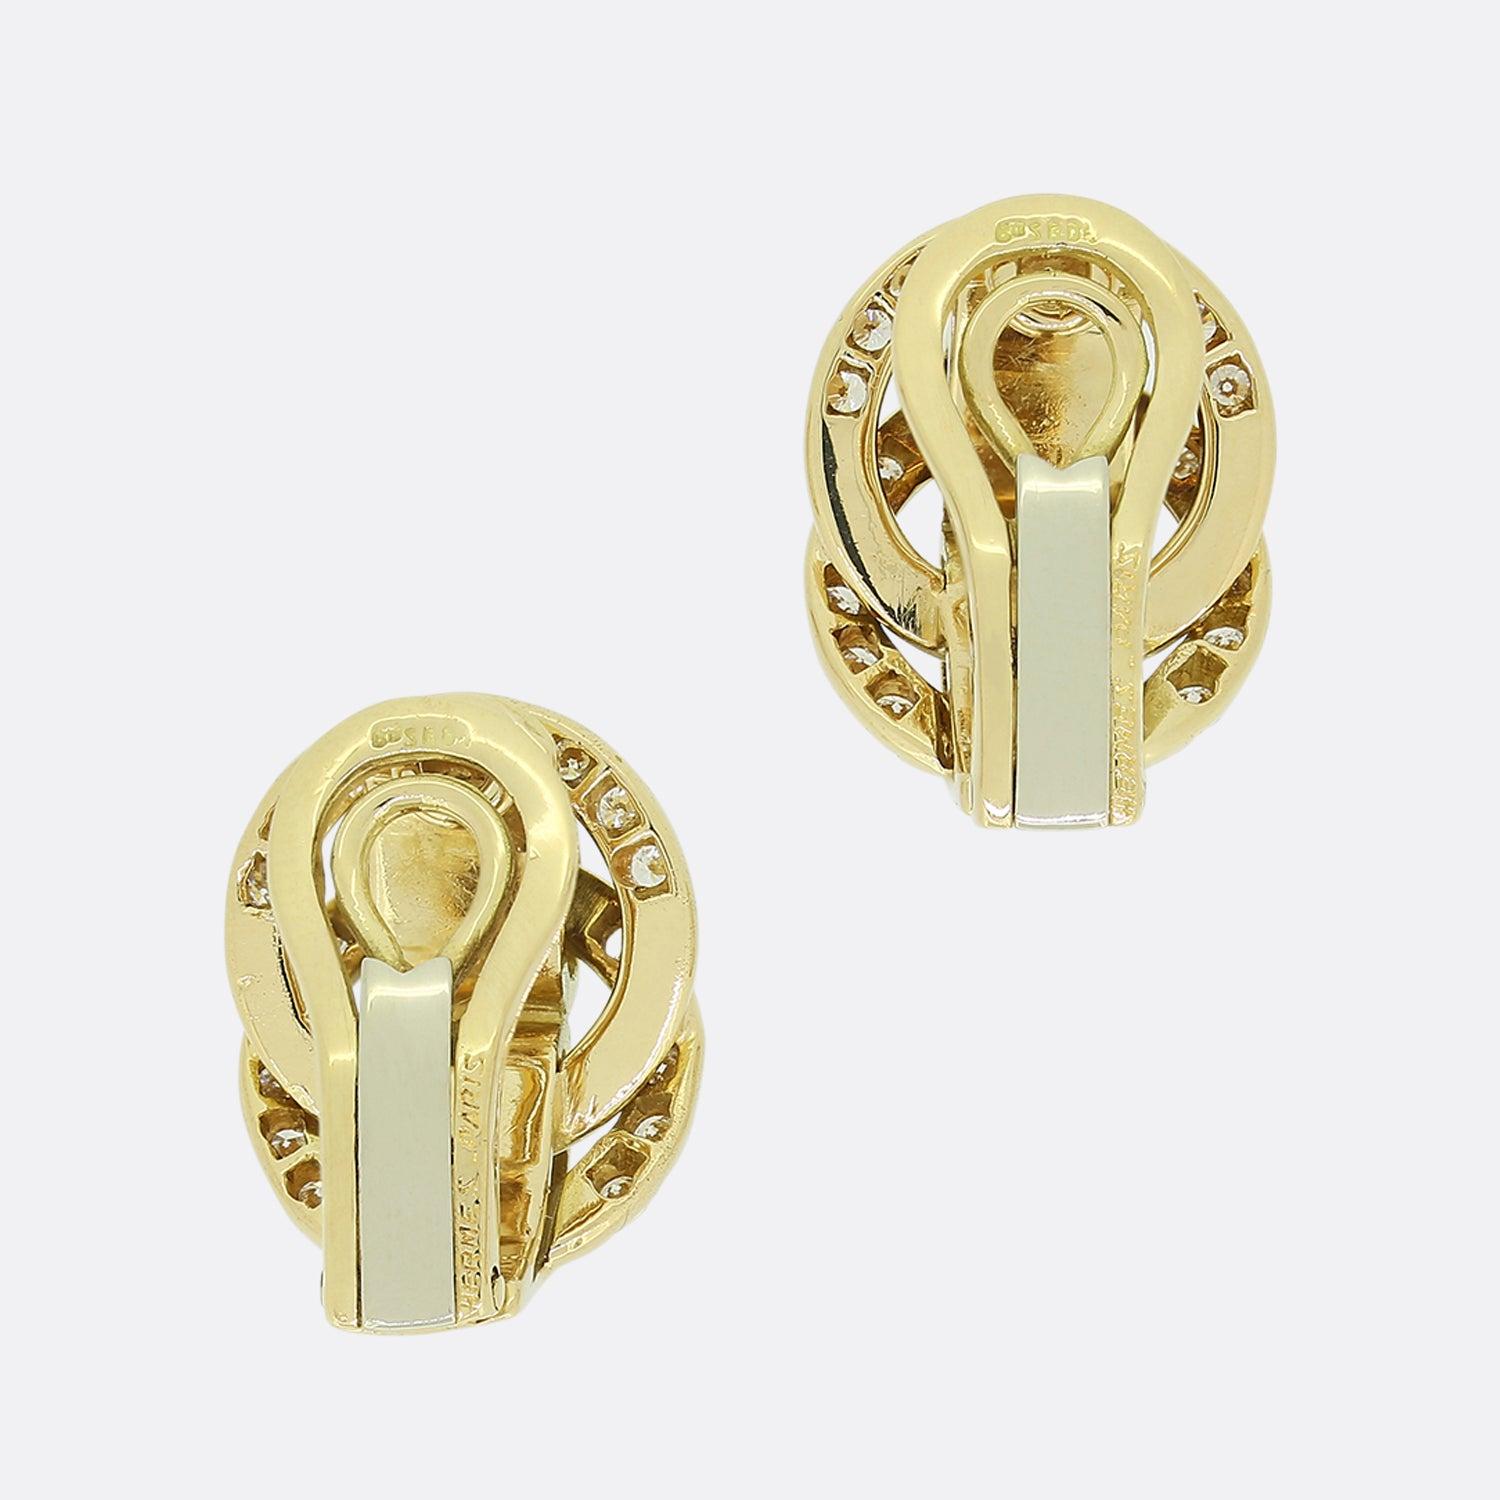 This is a beautiful pair of diamond clip earrings by the very well known designer Hermes. A matching pair, each set with nineteen transitional cut diamonds in open back settings, thirty eight in total with a combined approximate weight of 0.95